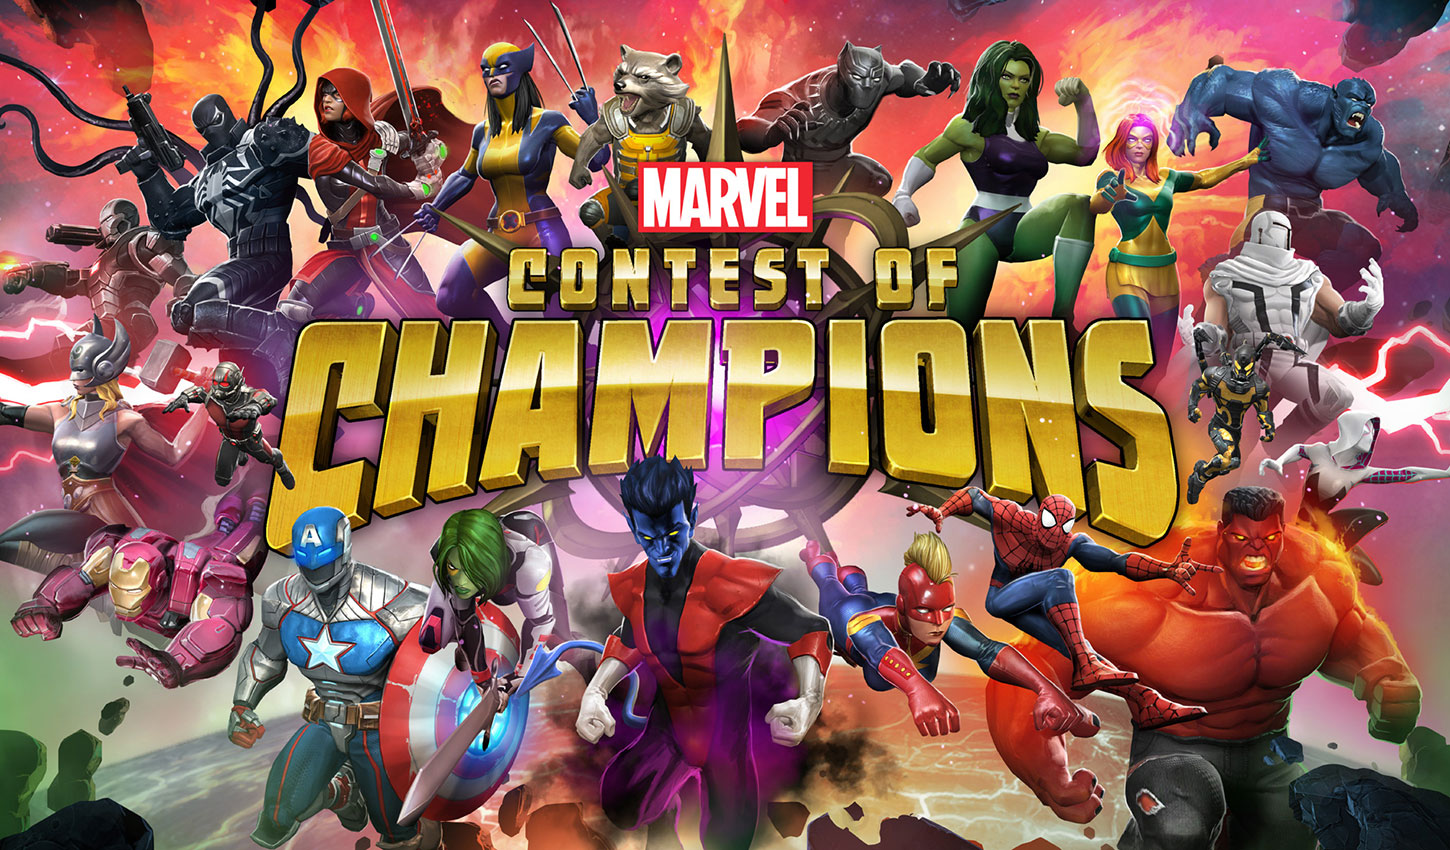 How to Get Free Units on Marvel Contest of Champions